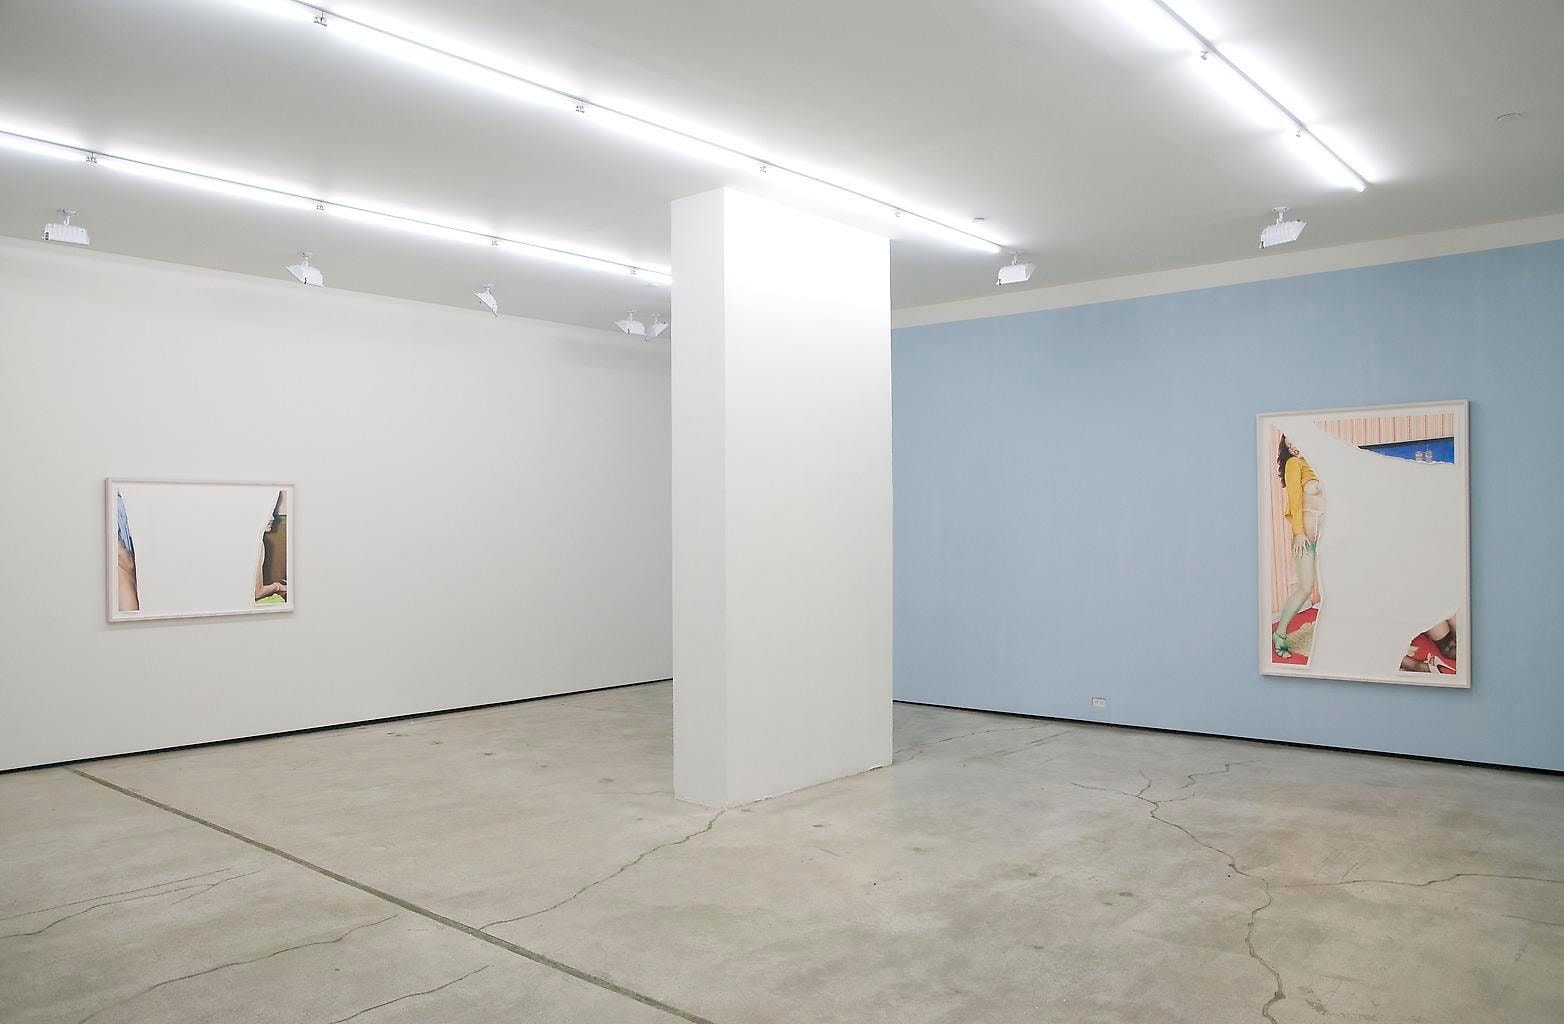  Installation view, Slawomir Elsner, Collecting Images, Marc Jancou, New York, June 7 - July 29, 2011